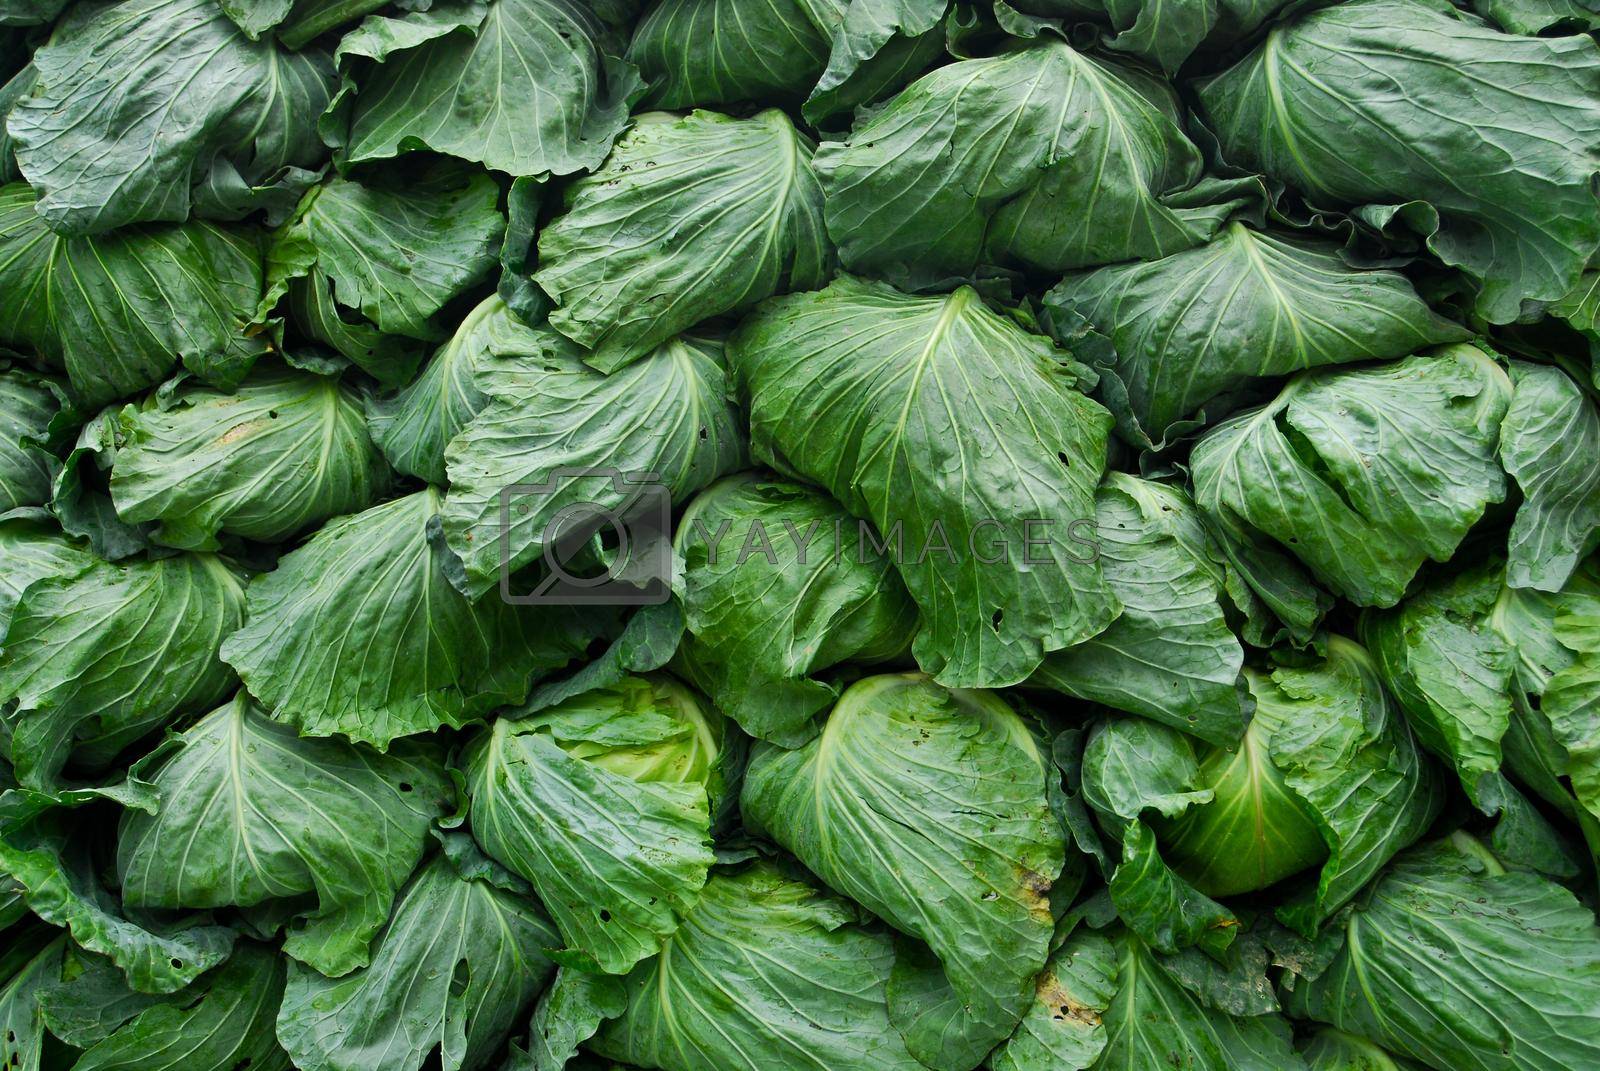 Royalty free image of organic cabbage arranged on truck for transportation  by Rodseng